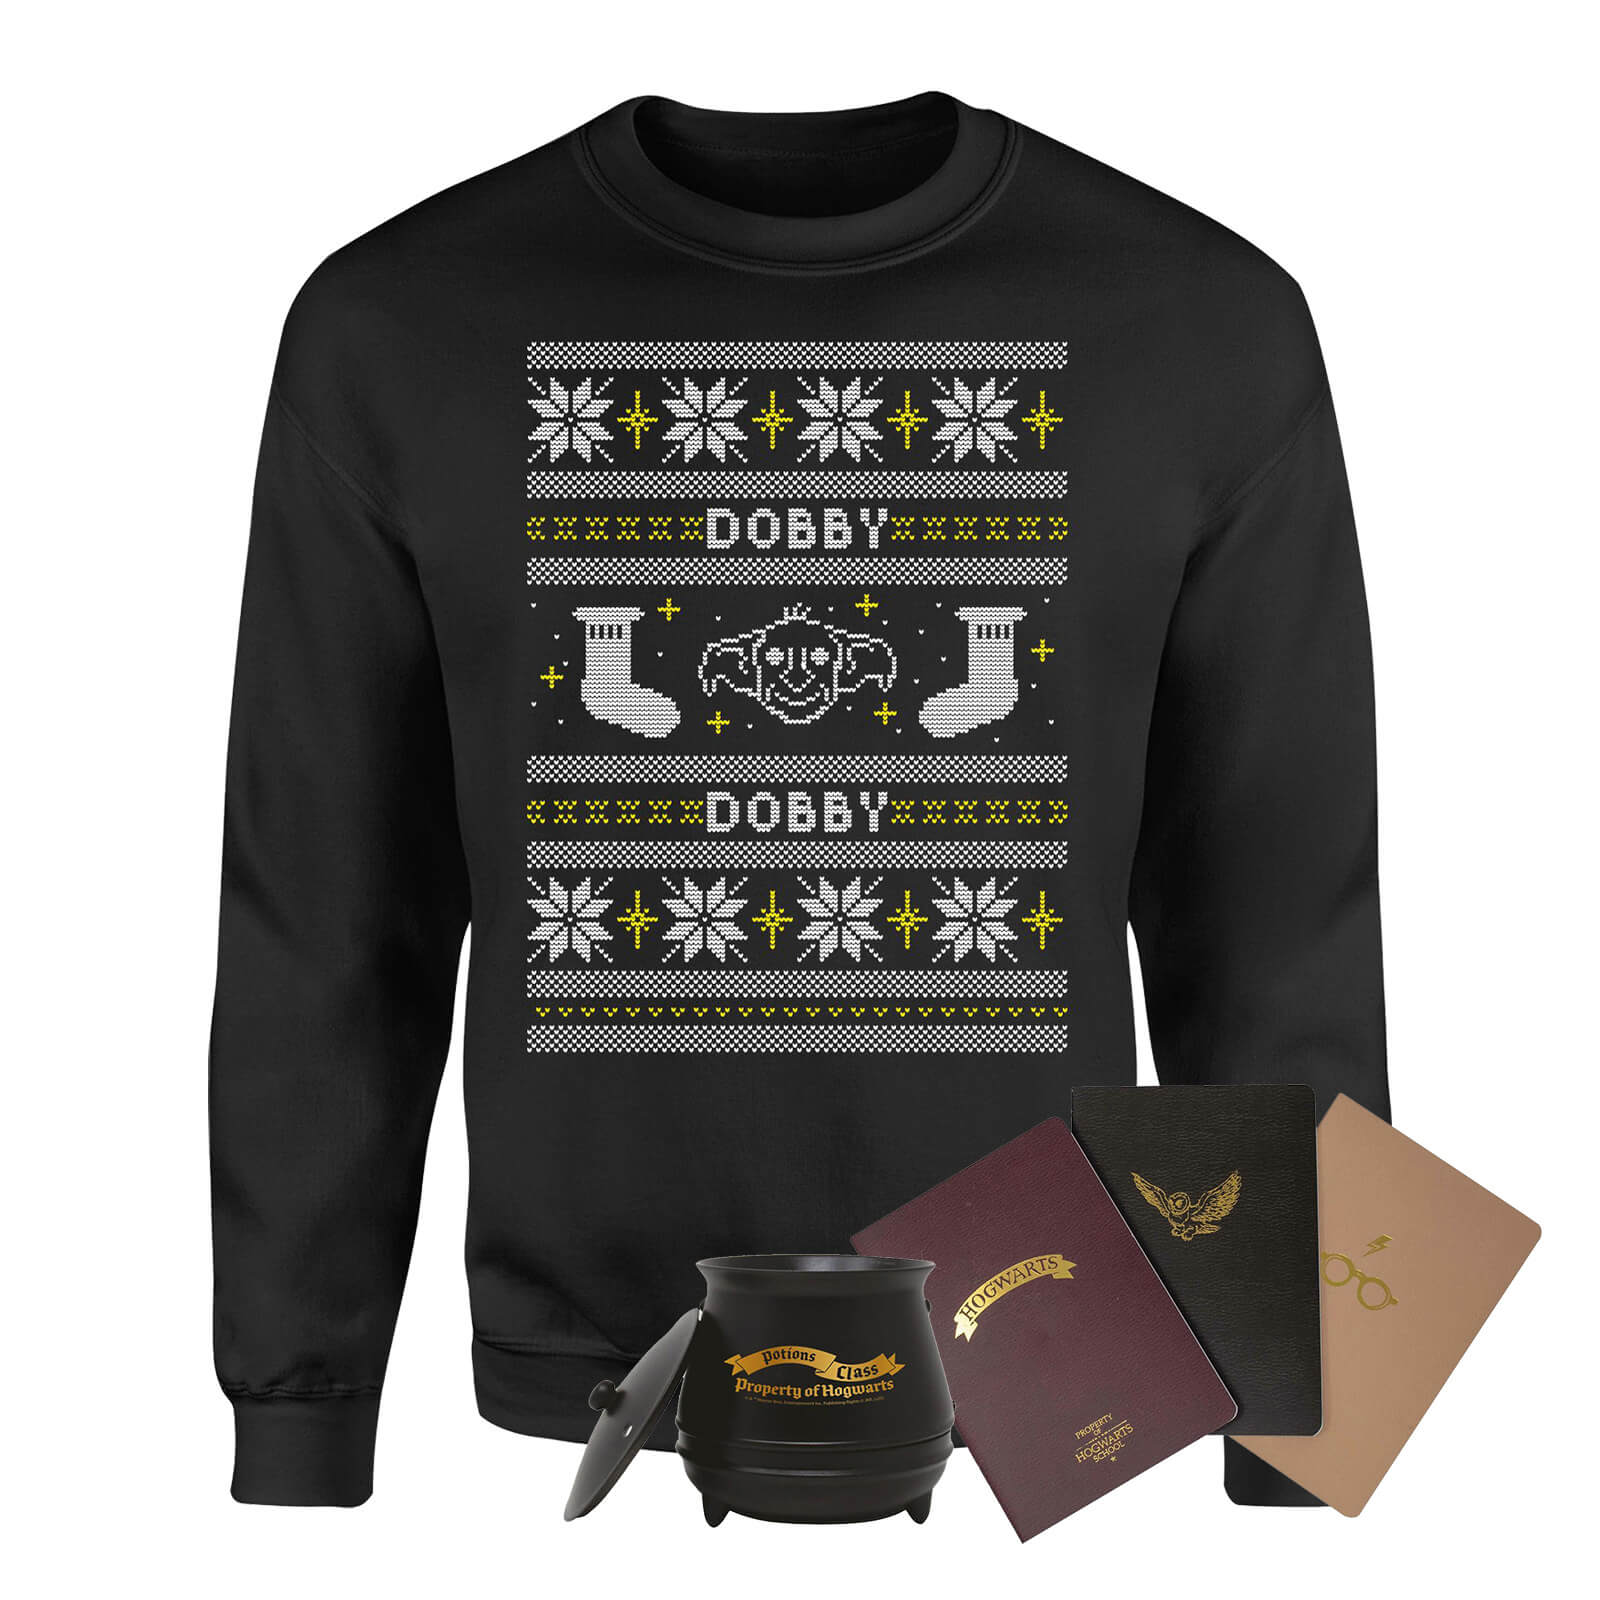 Harry Potter Officially Licensed MEGA Christmas Gift Set - Includes Christmas Sweatshirt plus 3 gifts - S